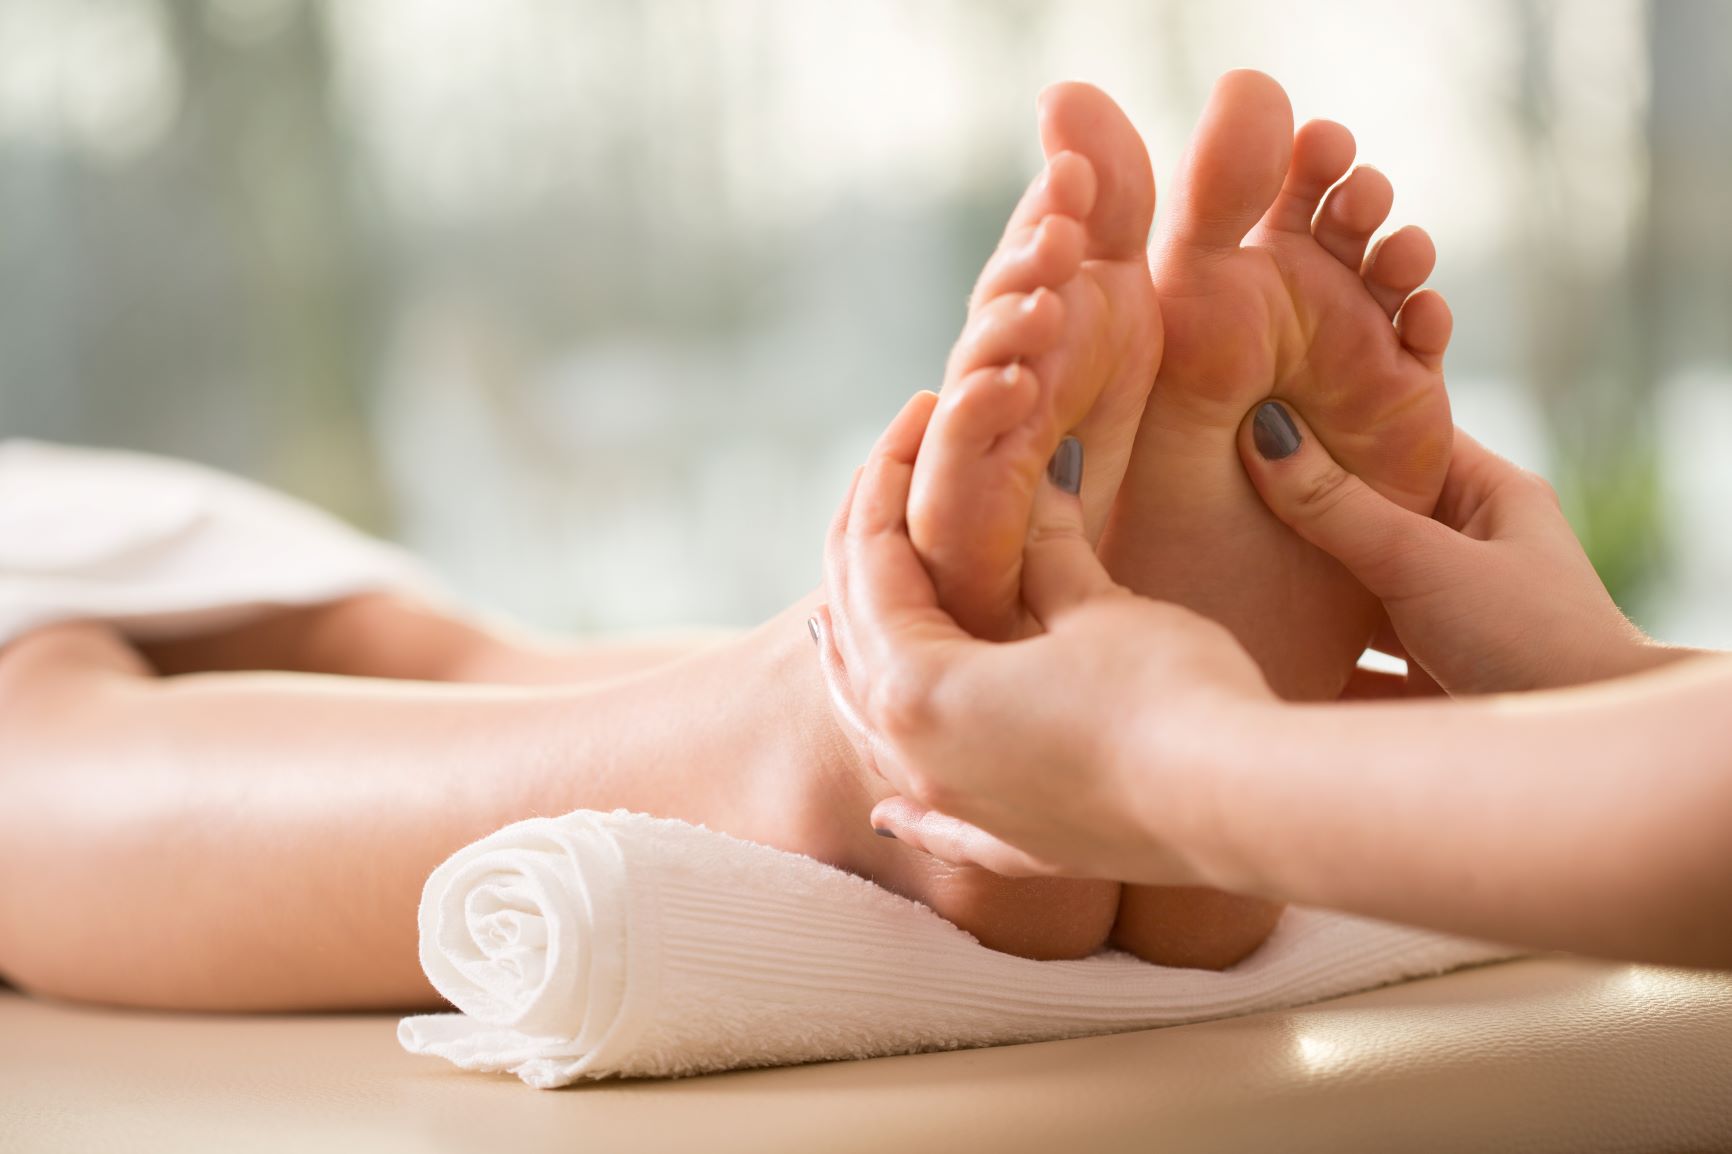 A woman getting a foot massage in a spa.